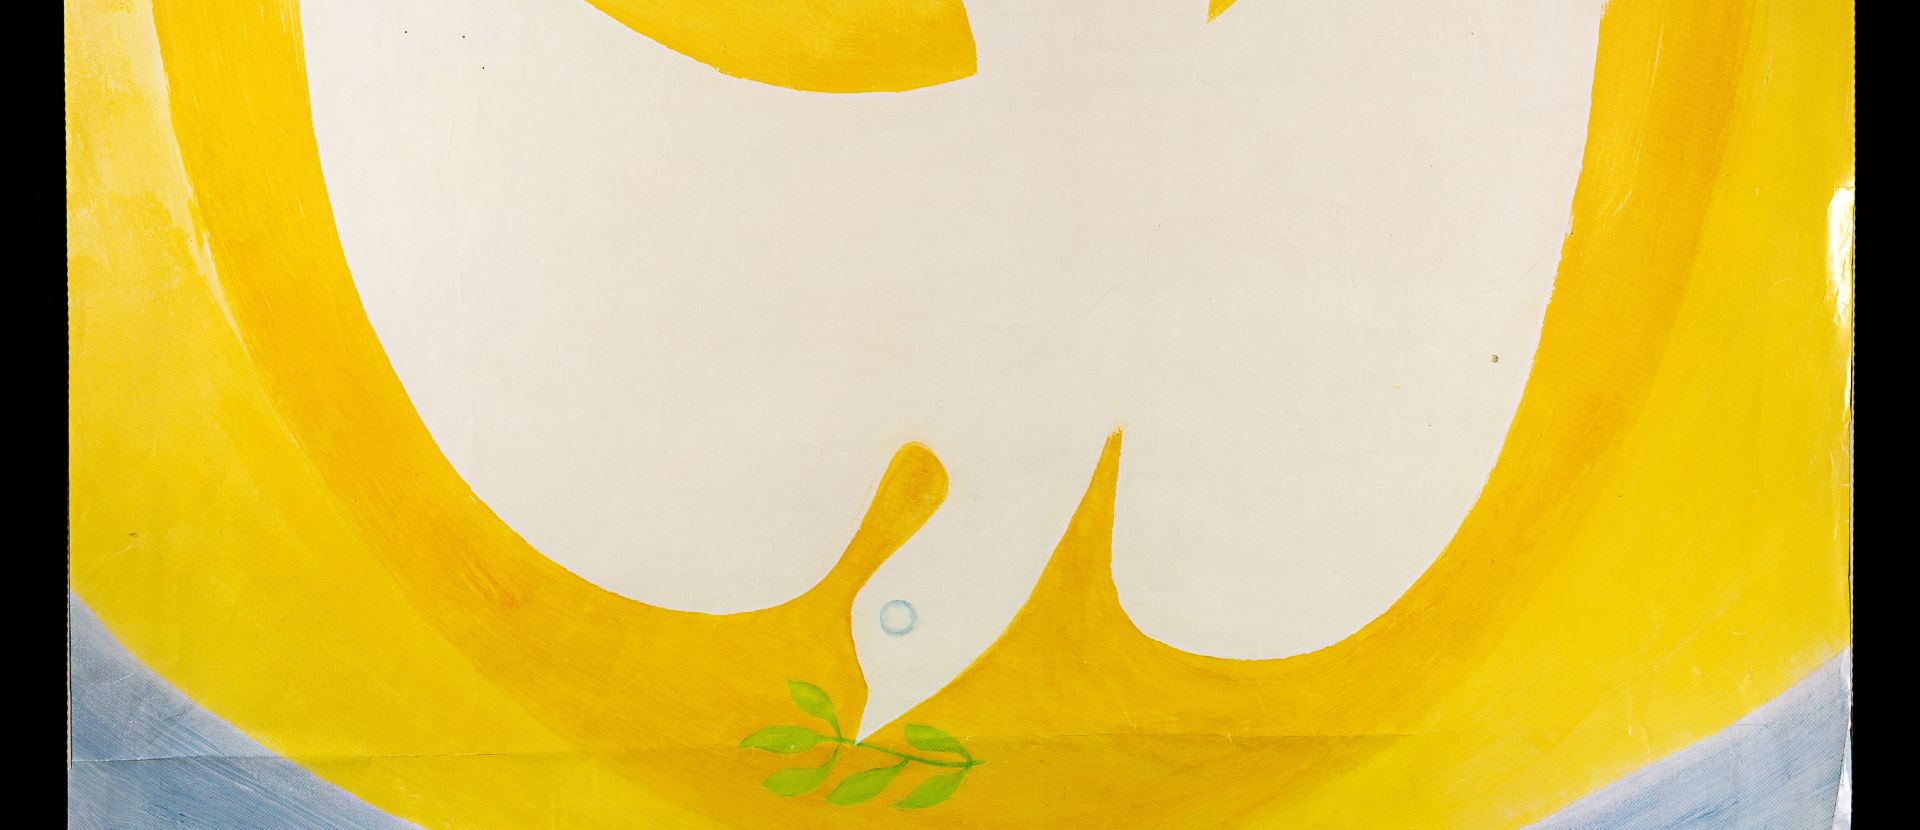 A white dove of peace on a yellow background